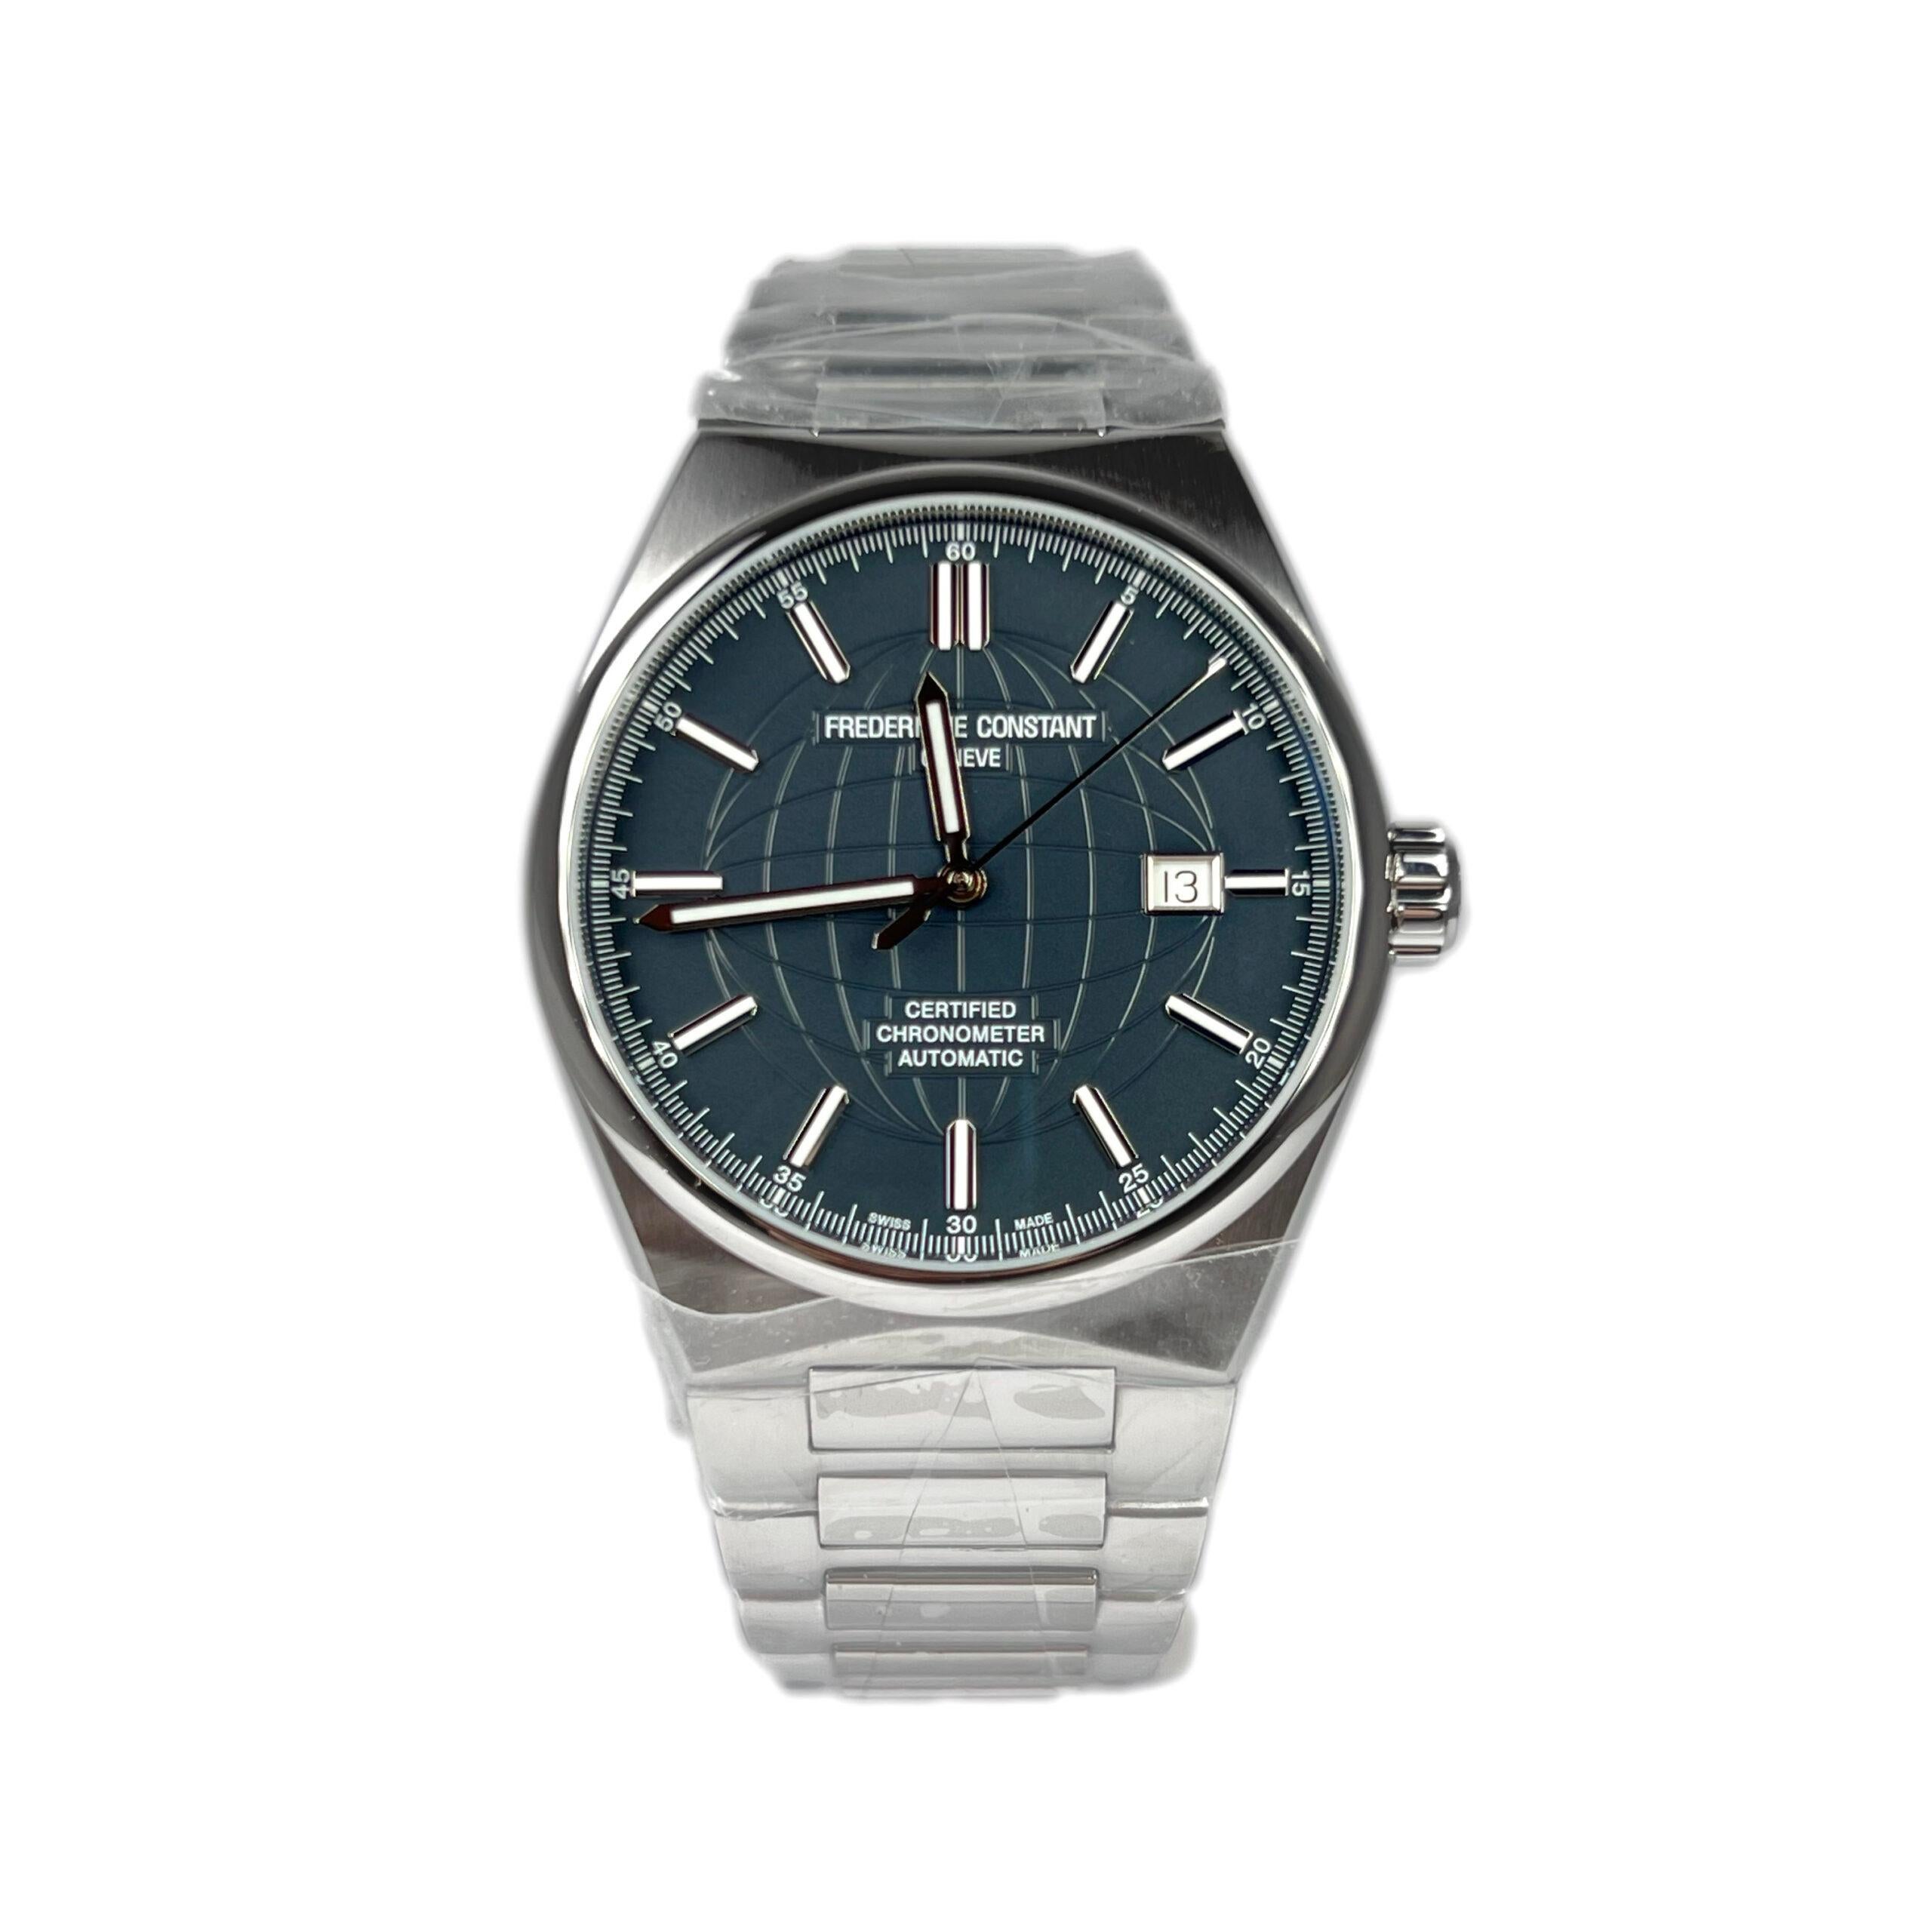 This Man’s Watch has a 41 mm stainless steel case with a stainless steel bracelet. Fixed stainless steel bezel. Bluish gray dial with luminous grey hands and index hour markers. Arabic numeral minute markers (at 5 minute intervals). Minute markers